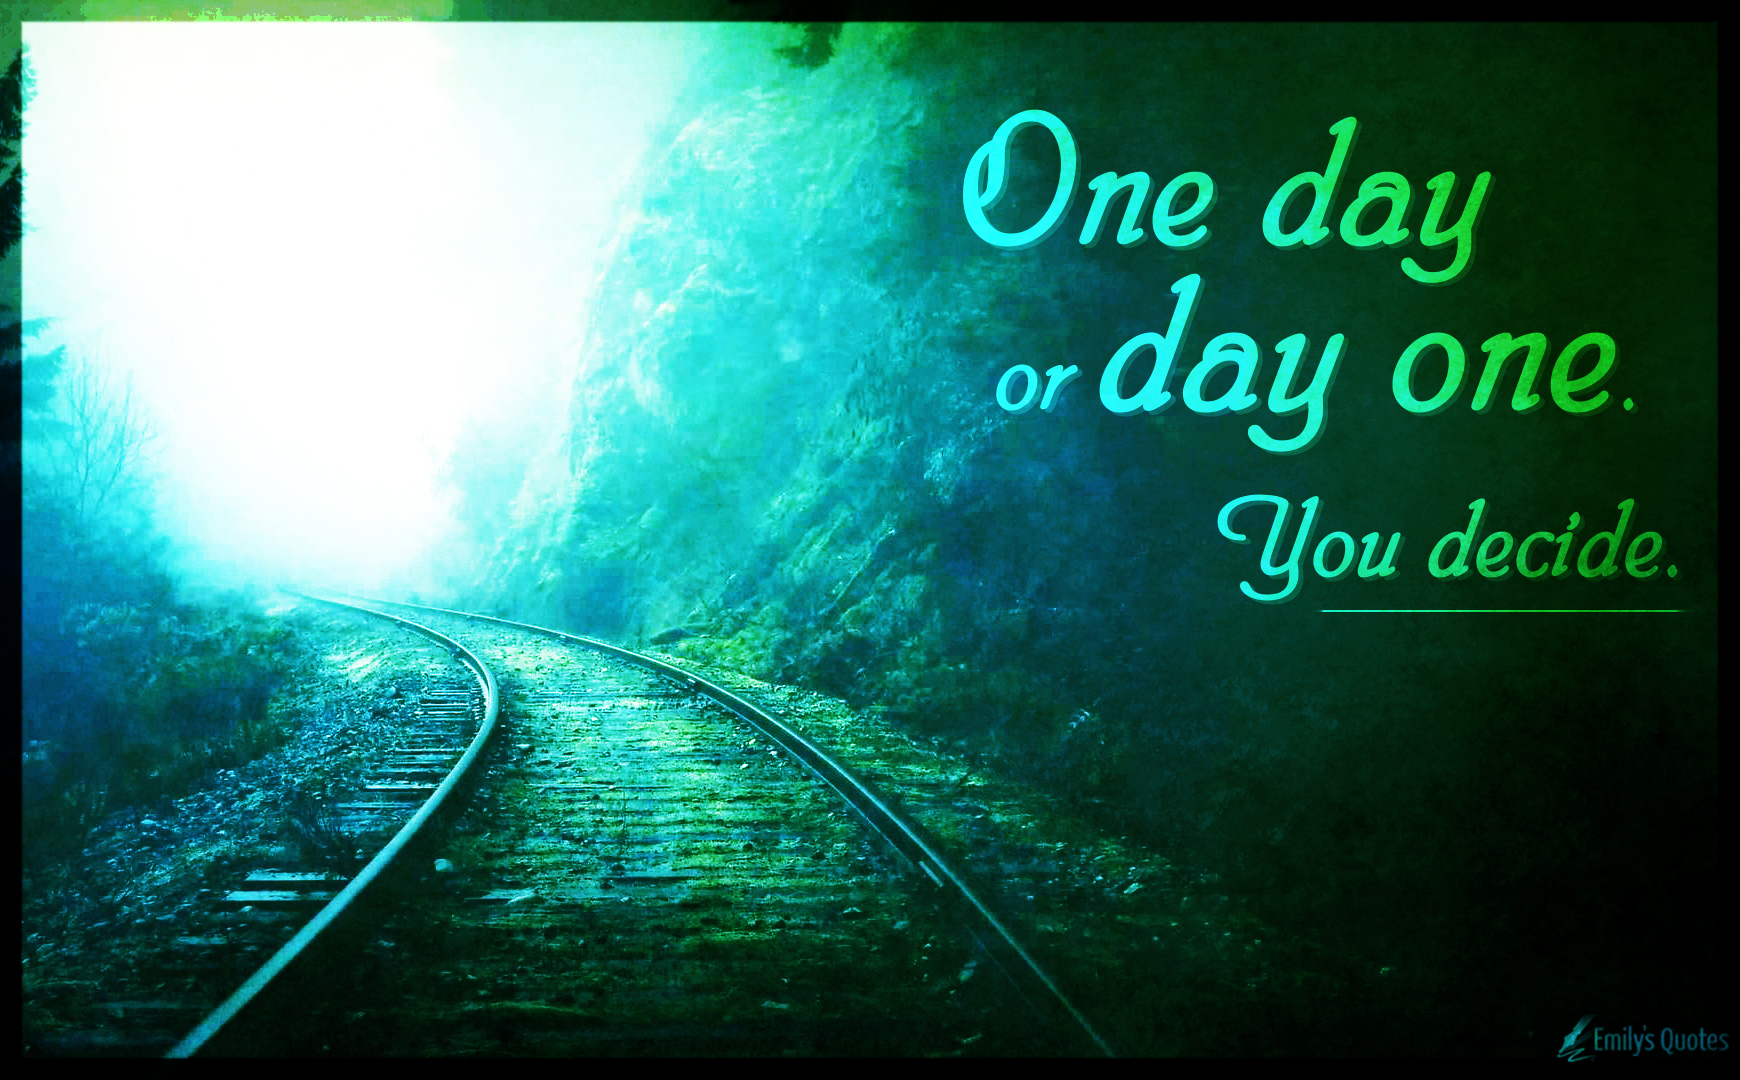 One day or day one. You decide